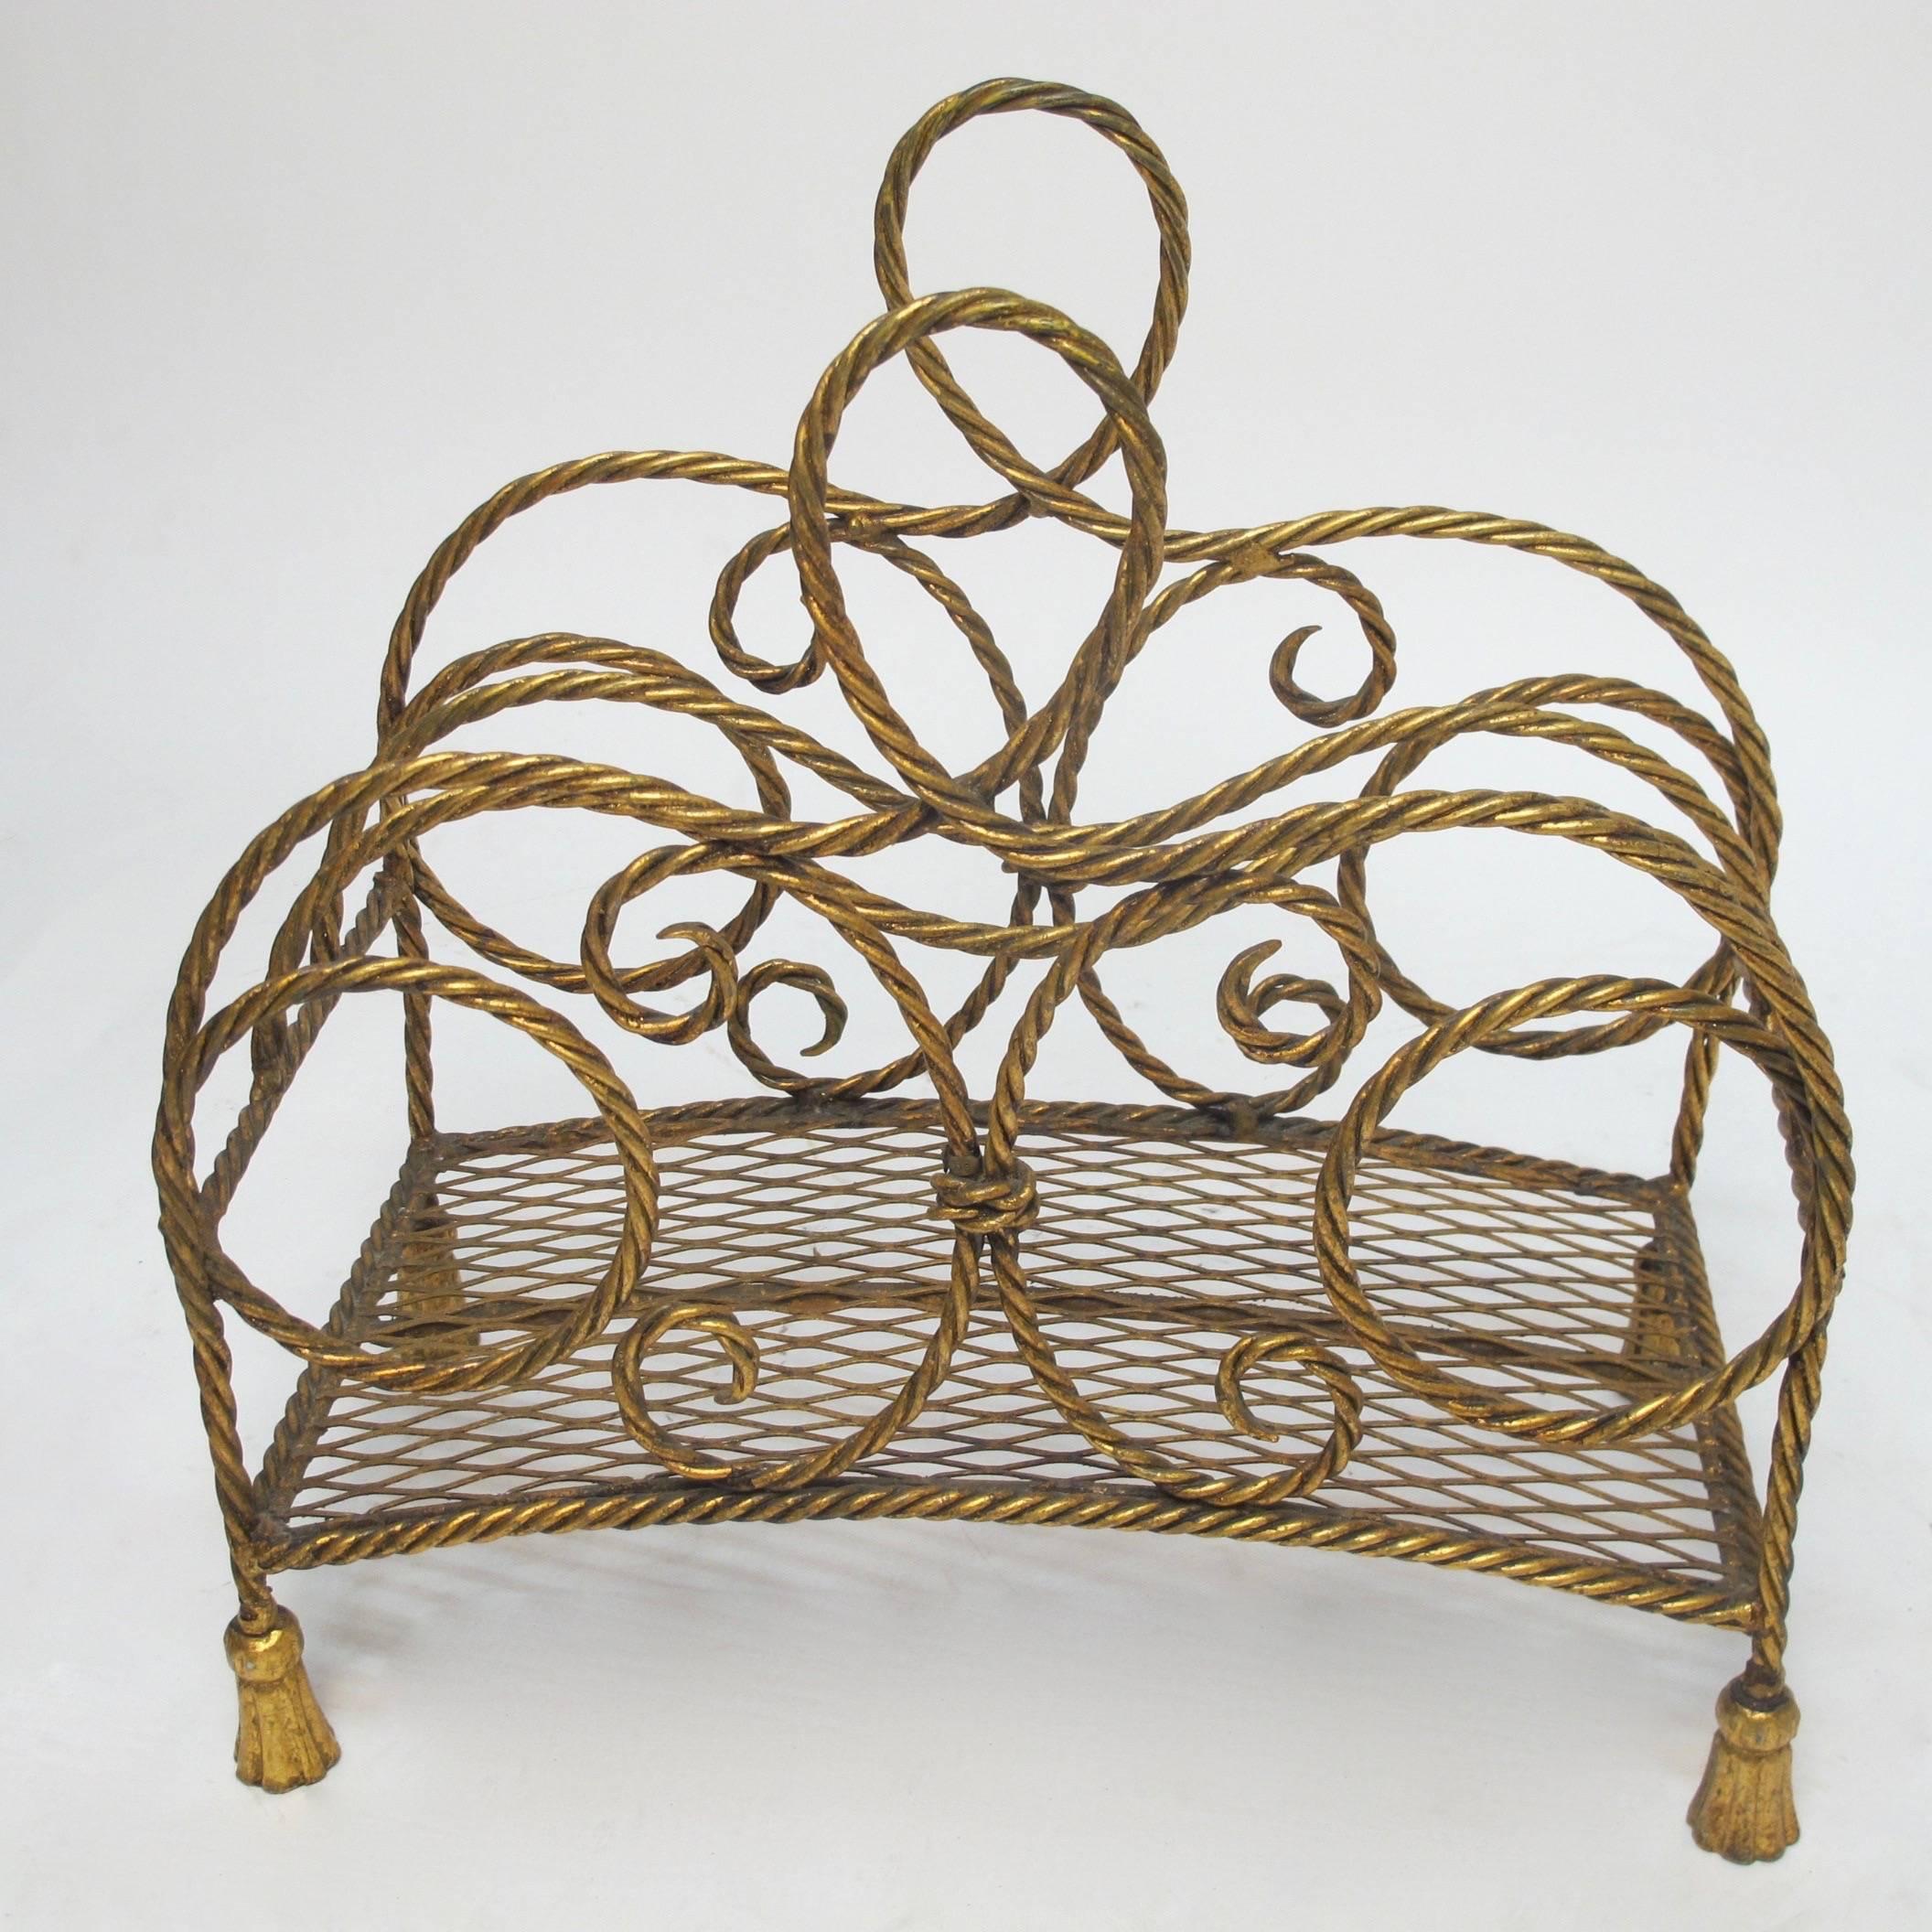 A vintage gilt metal magazine stand with a twisted rope design sitting on tassel feet, Italy, 1960s.